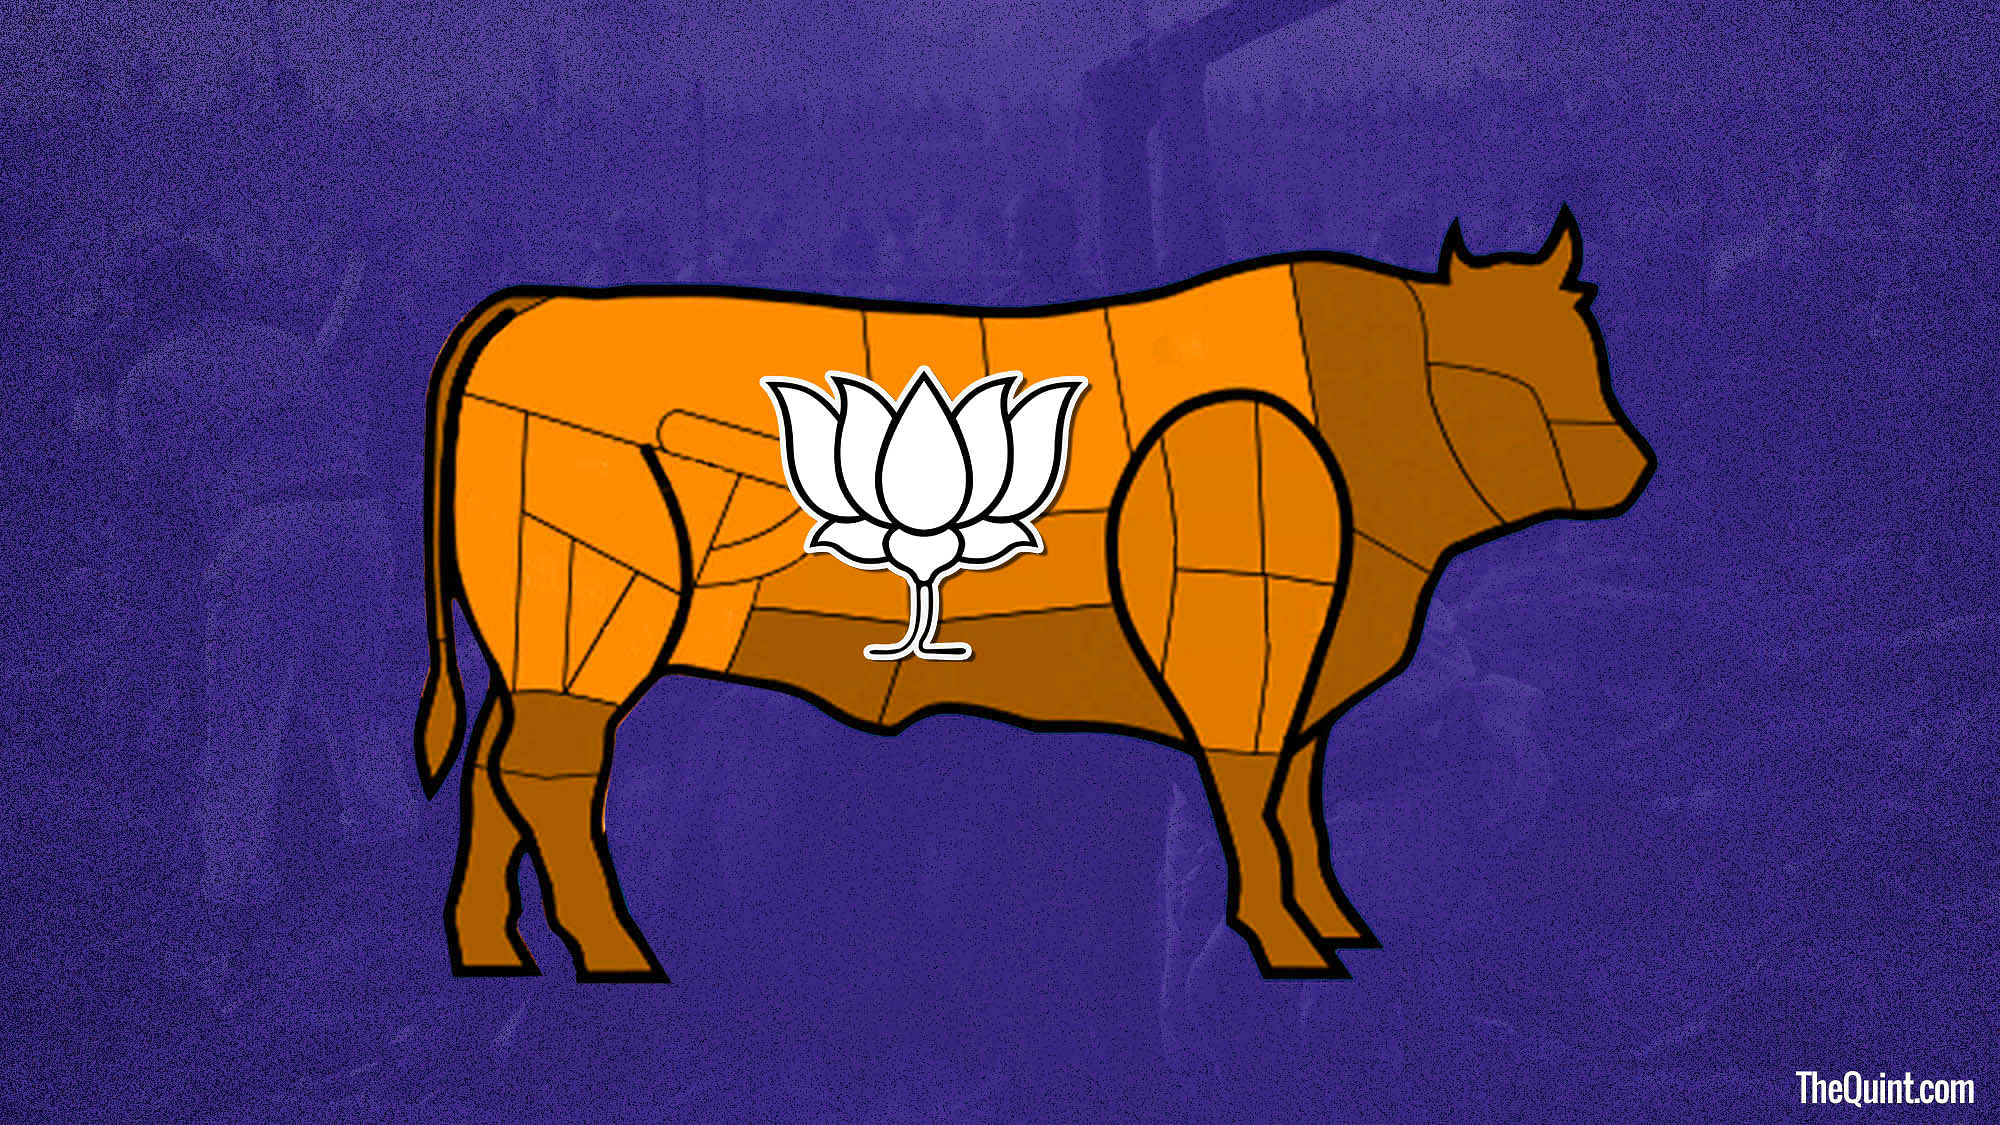 BJP is following Congress’ footsteps in the Northeast with its cow politics. (Photo: Harsh Sahani/<b>The Quint</b>)